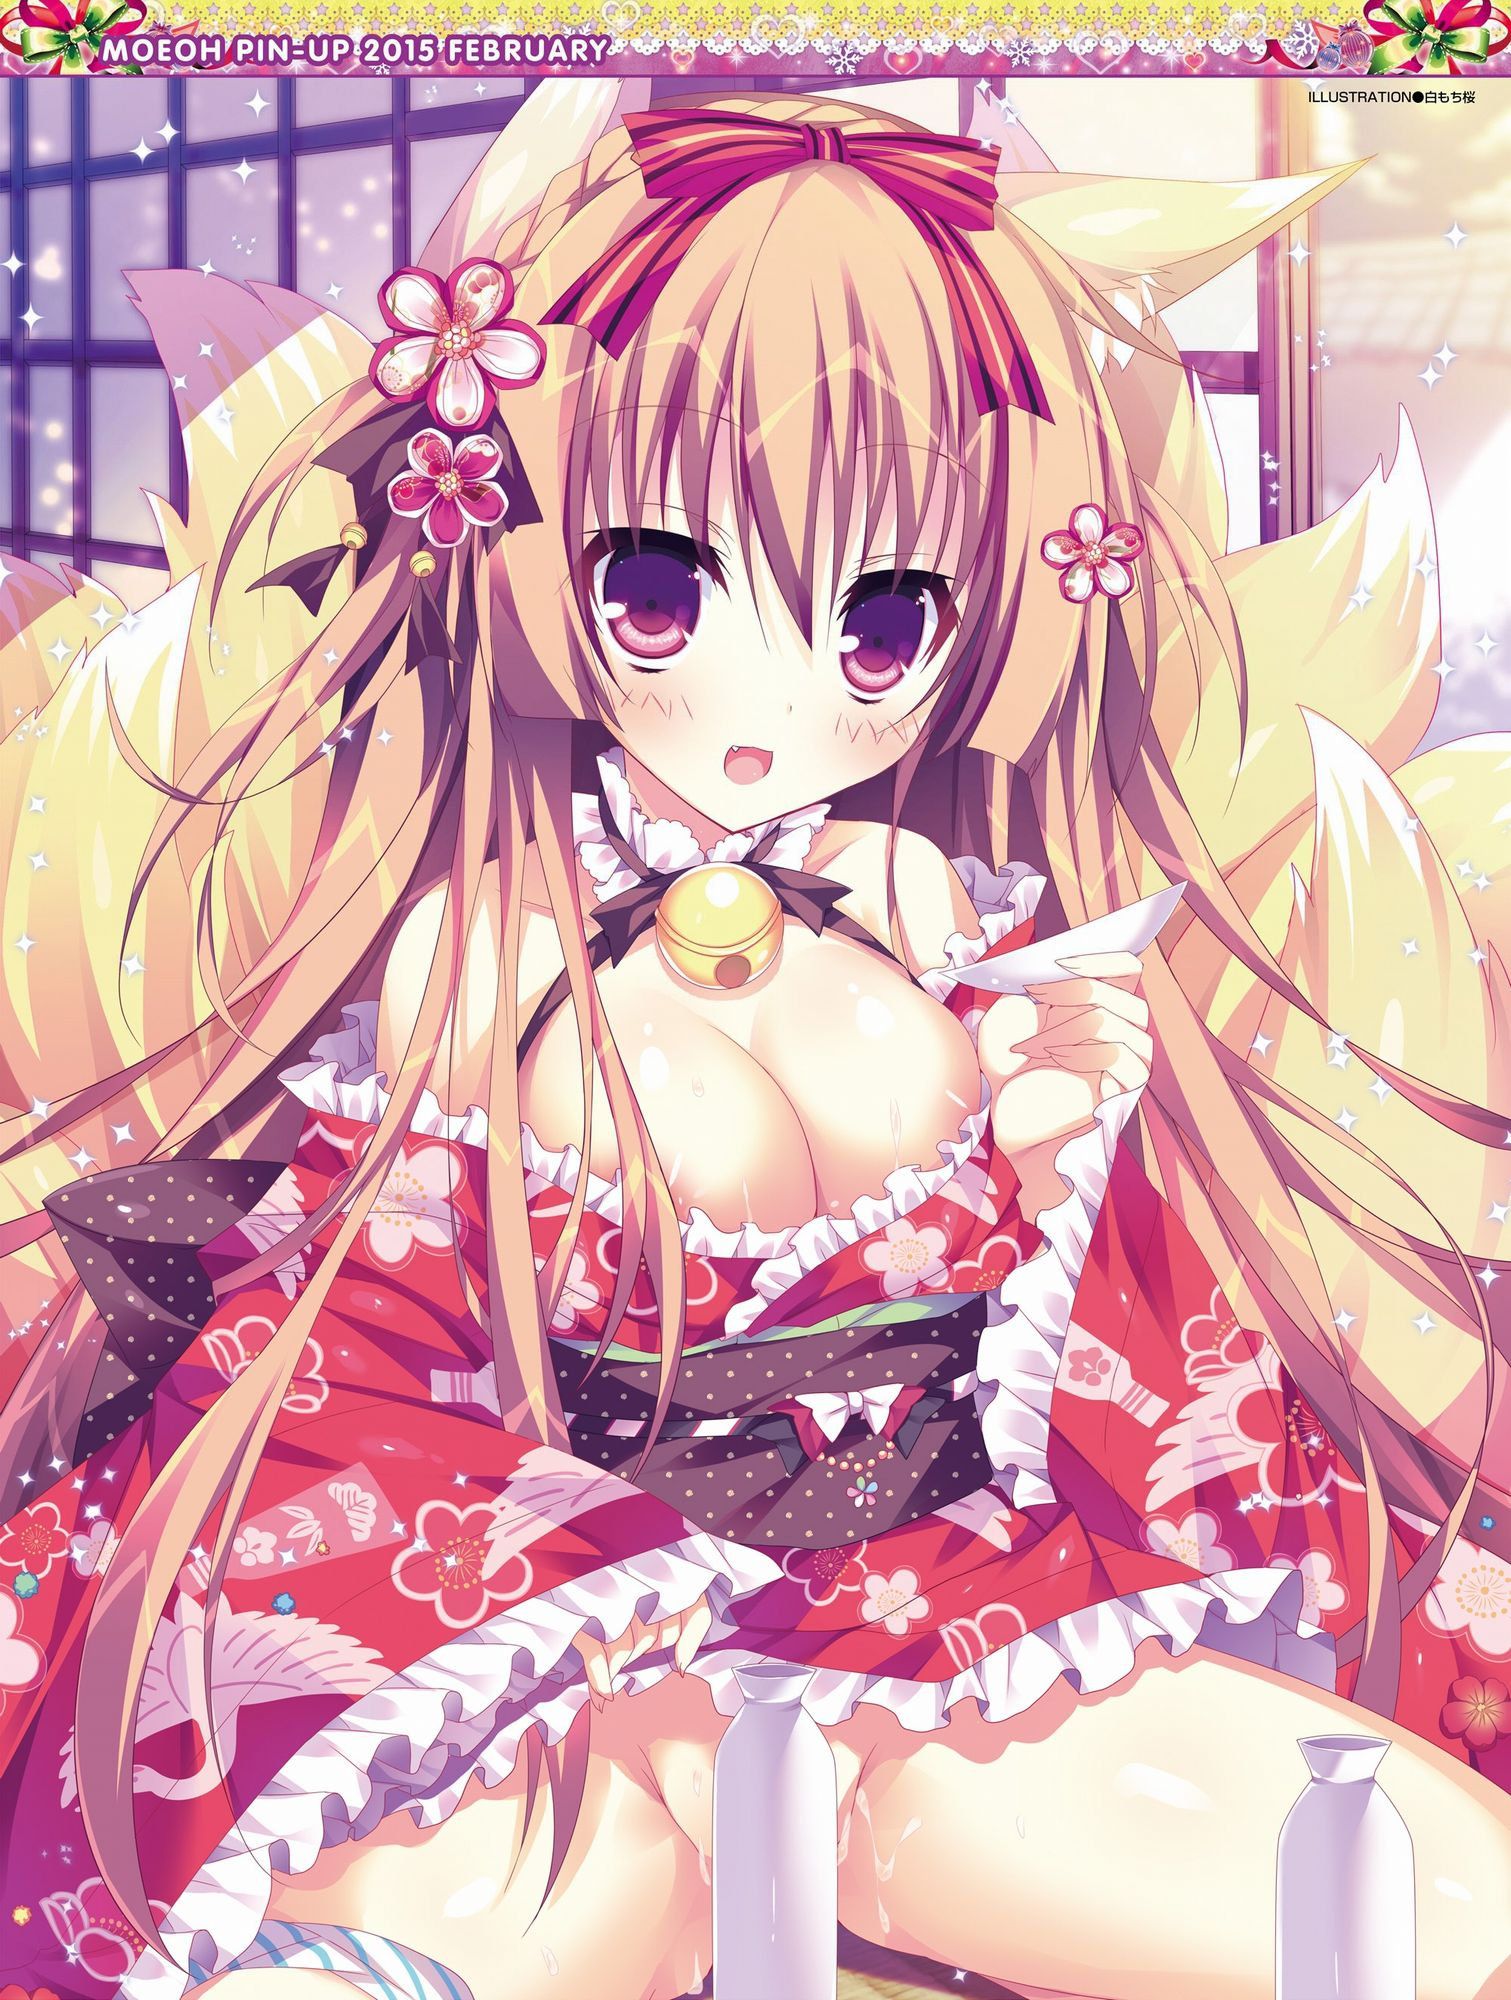 Erotic image of a girl who makes you feel Japanese, such as a shrine maiden or yukata 4